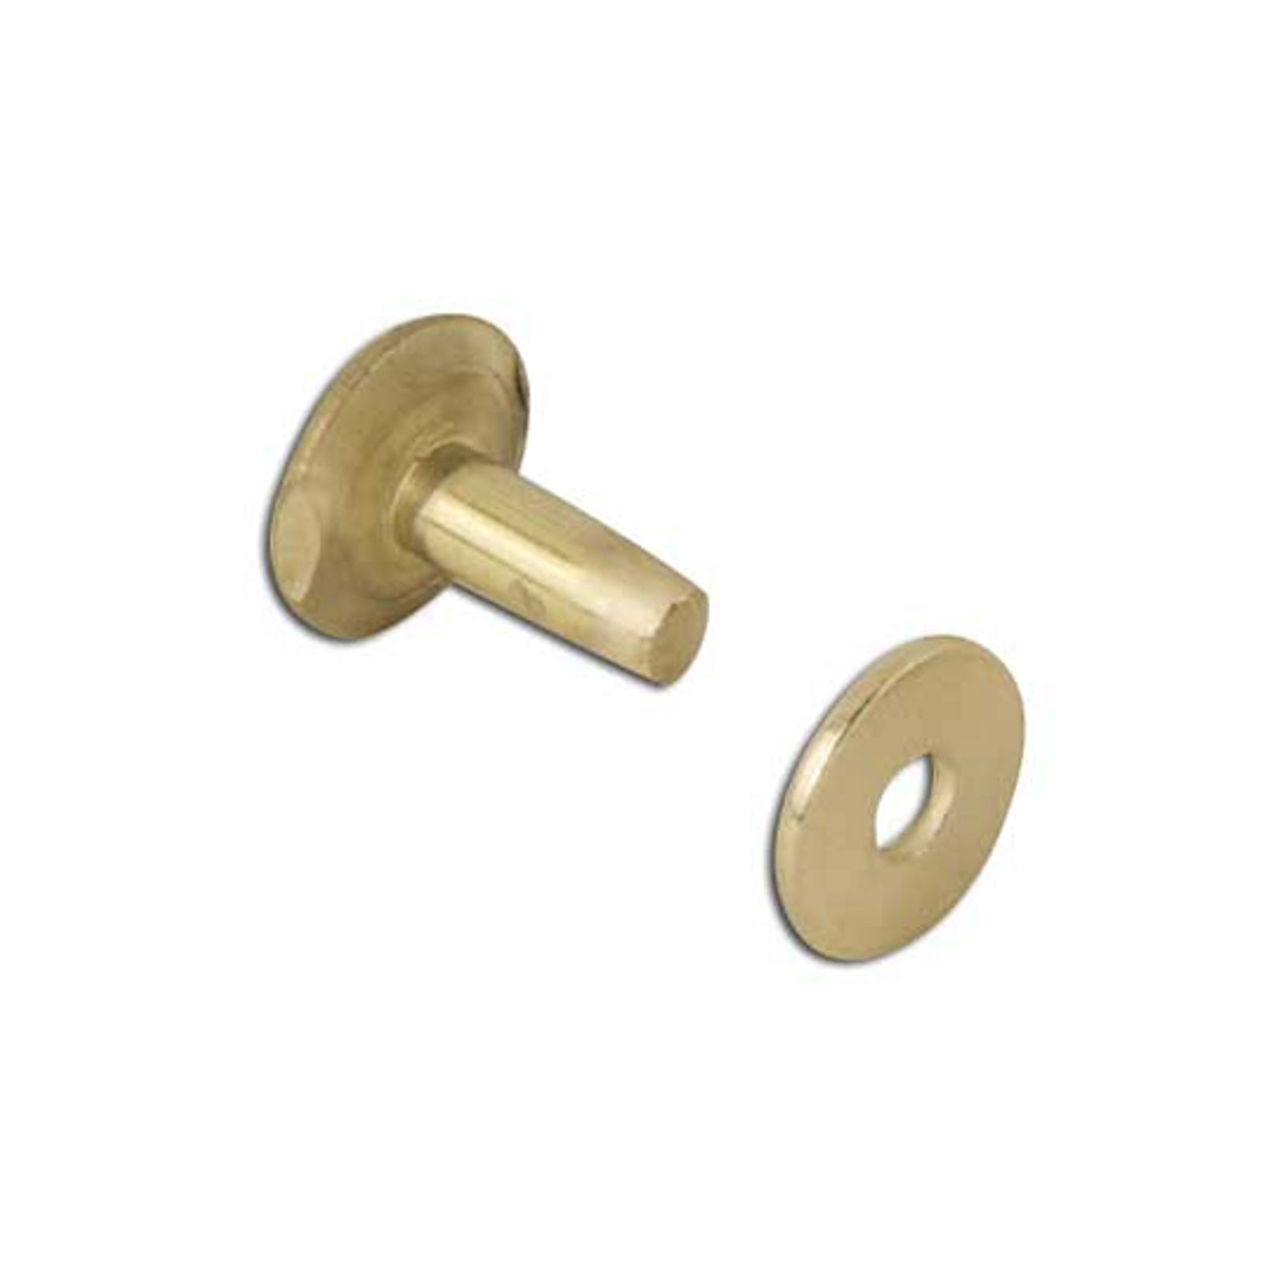 Brass Rivets and Burrs 1/2" #9 11280-20